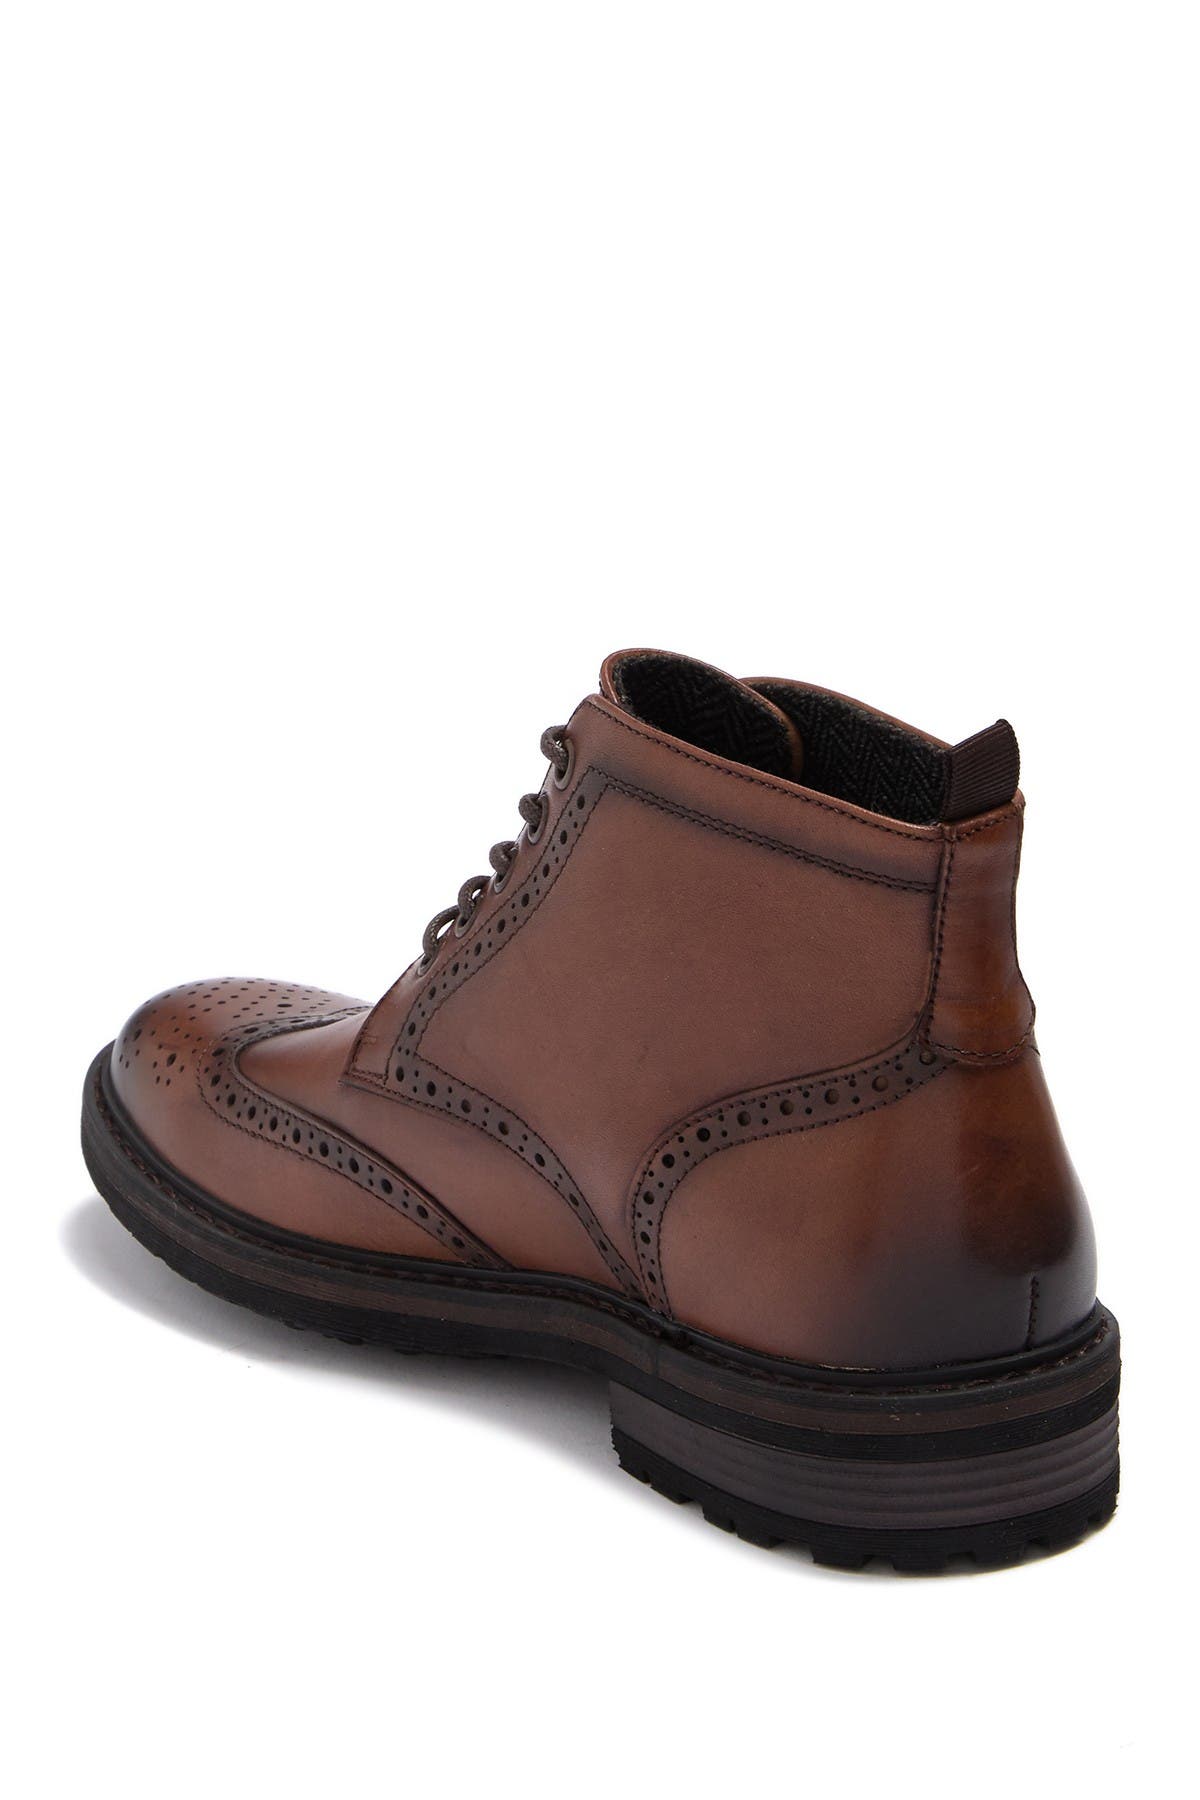 kenneth cole wingtip boots